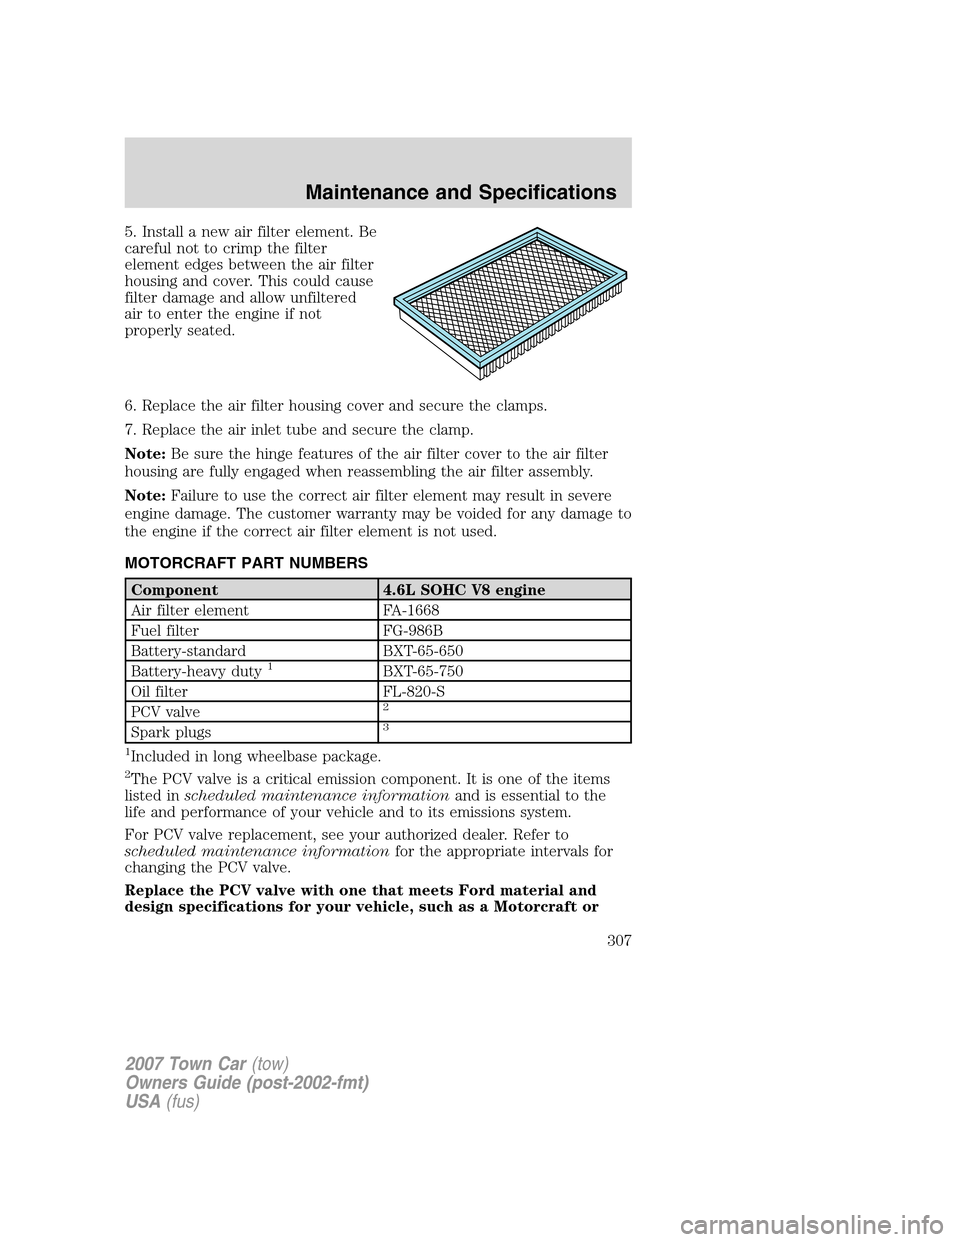 LINCOLN TOWN CAR 2007  Owners Manual 5. Install a new air filter element. Be
careful not to crimp the filter
element edges between the air filter
housing and cover. This could cause
filter damage and allow unfiltered
air to enter the eng